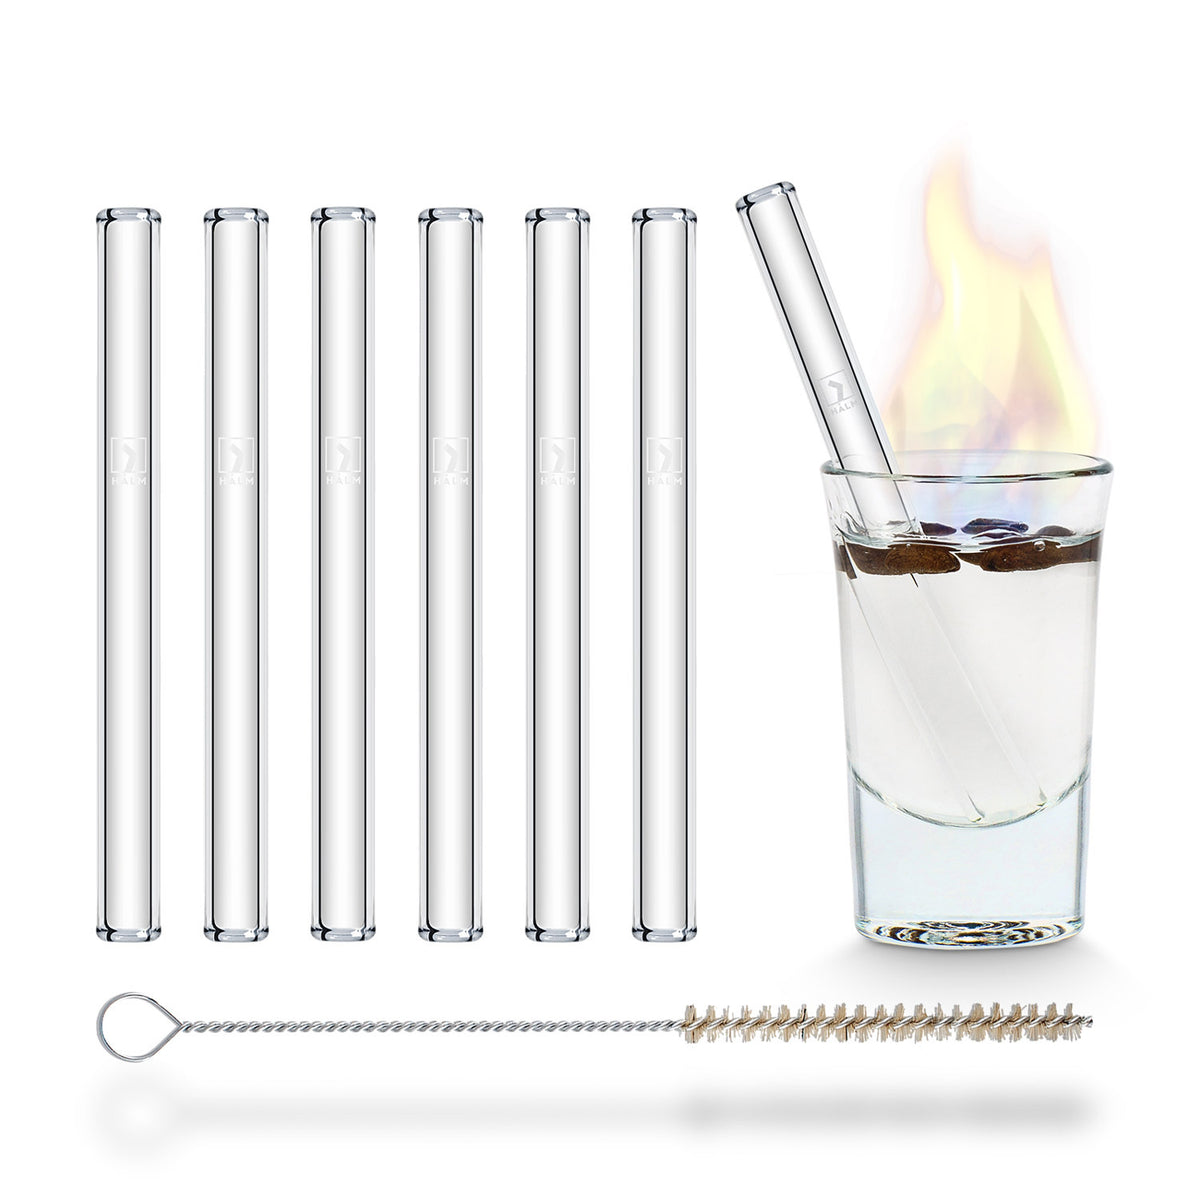 Reusable Glass Straw Party Pack 4 inch with plastic free brush - Set of 20